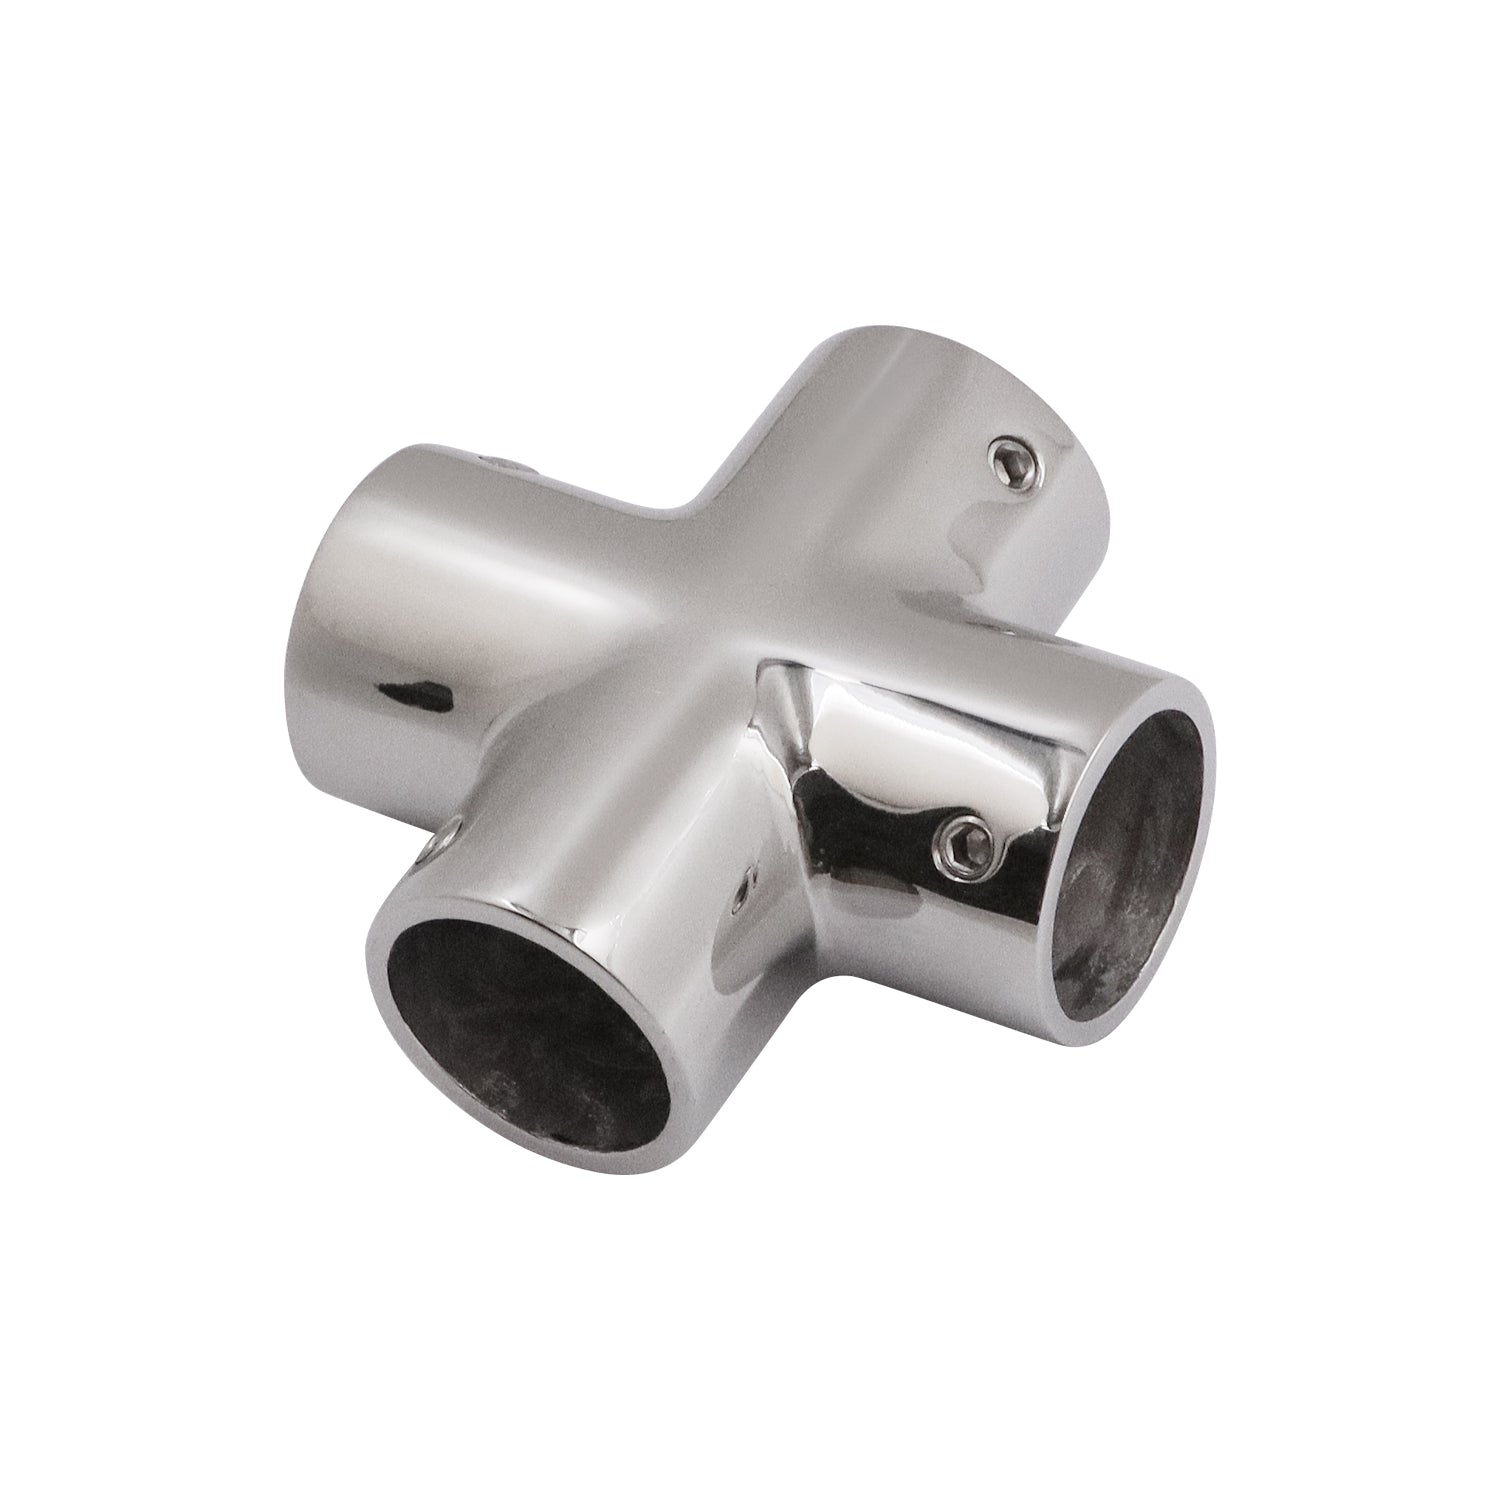 Precision Casting Stainless Steel 4 Way Tee Rail Connector for